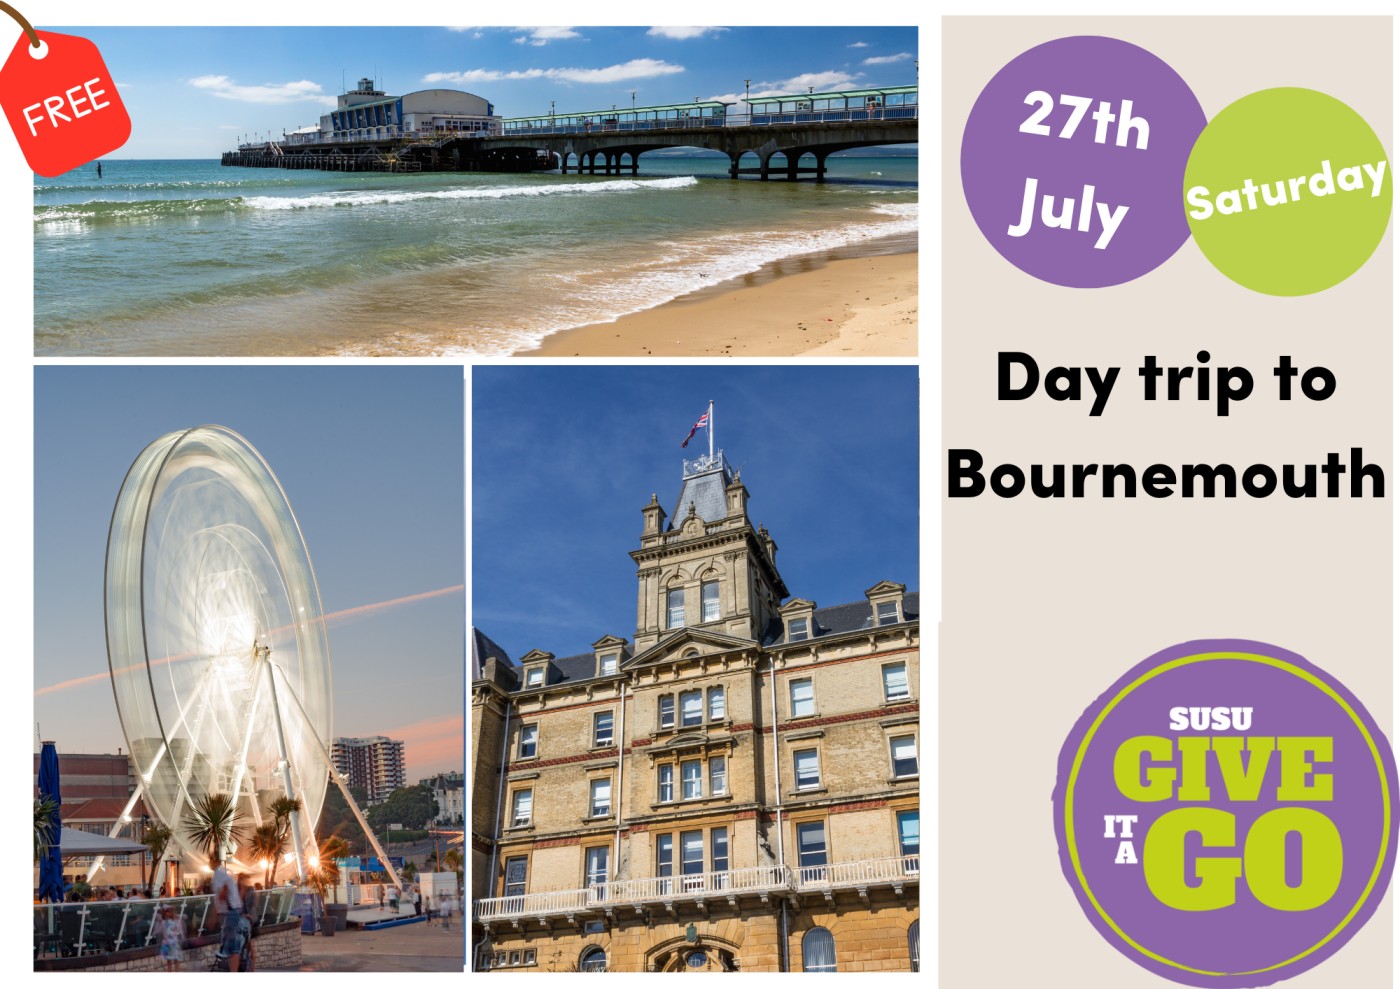 GIAG Come N Go: Day Trip to Bournemouth